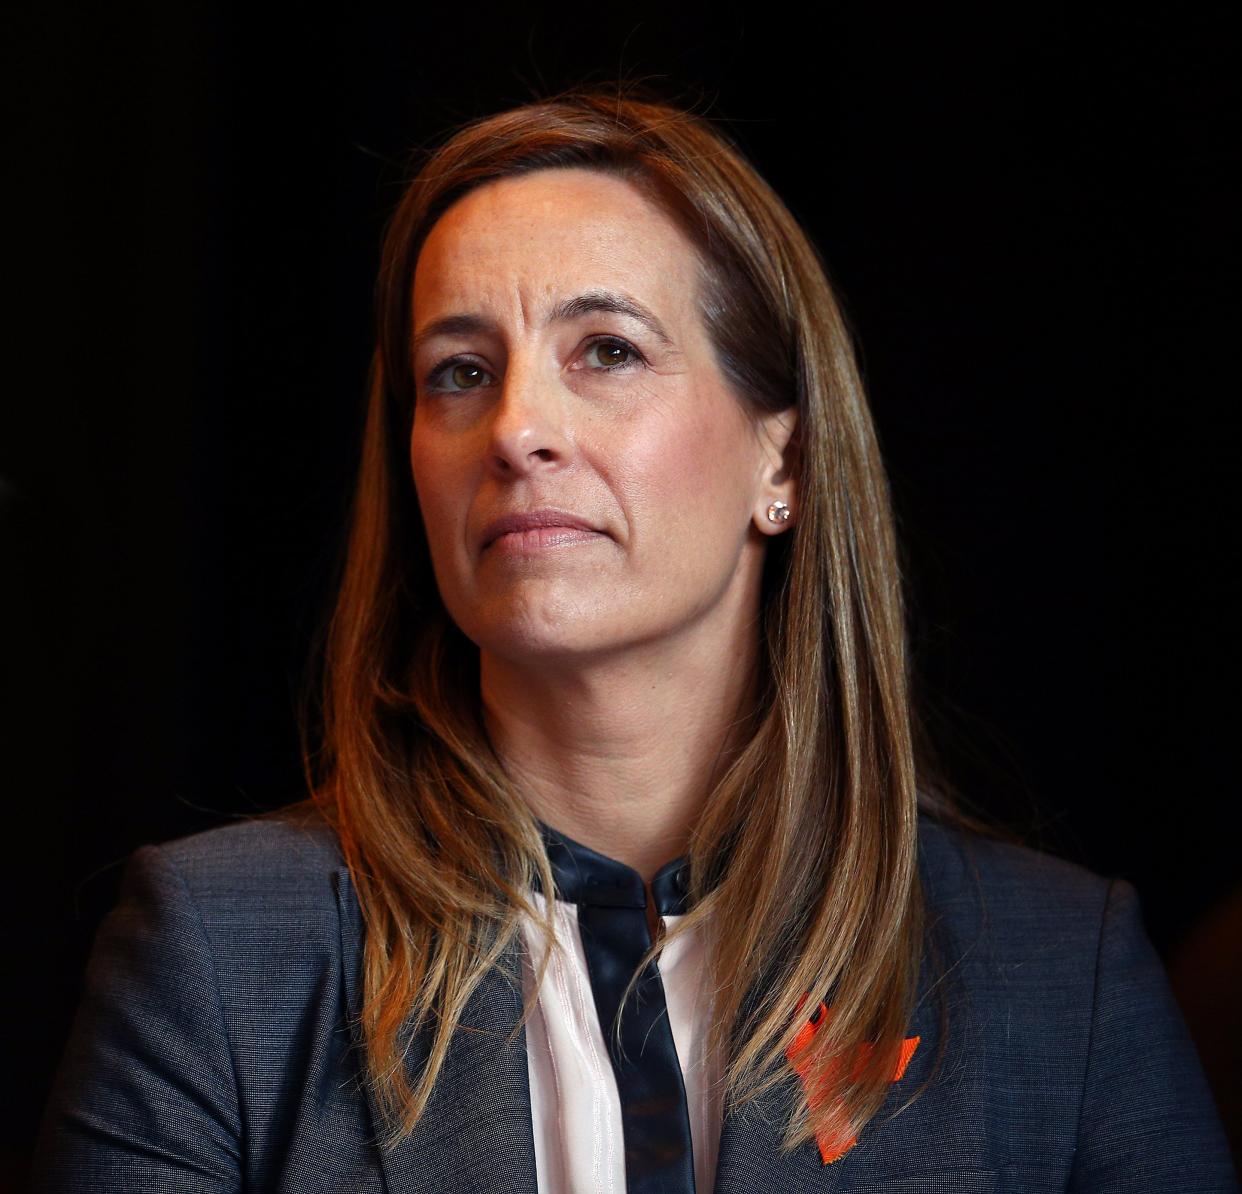 Mikie Sherrill of Upper Montclair gives her opening statement during the March for Our Lives - Morristown NJ District 11 Town Hall at Thomas Jefferson Elementary School. April 6, 2018. Morristown, NJ.